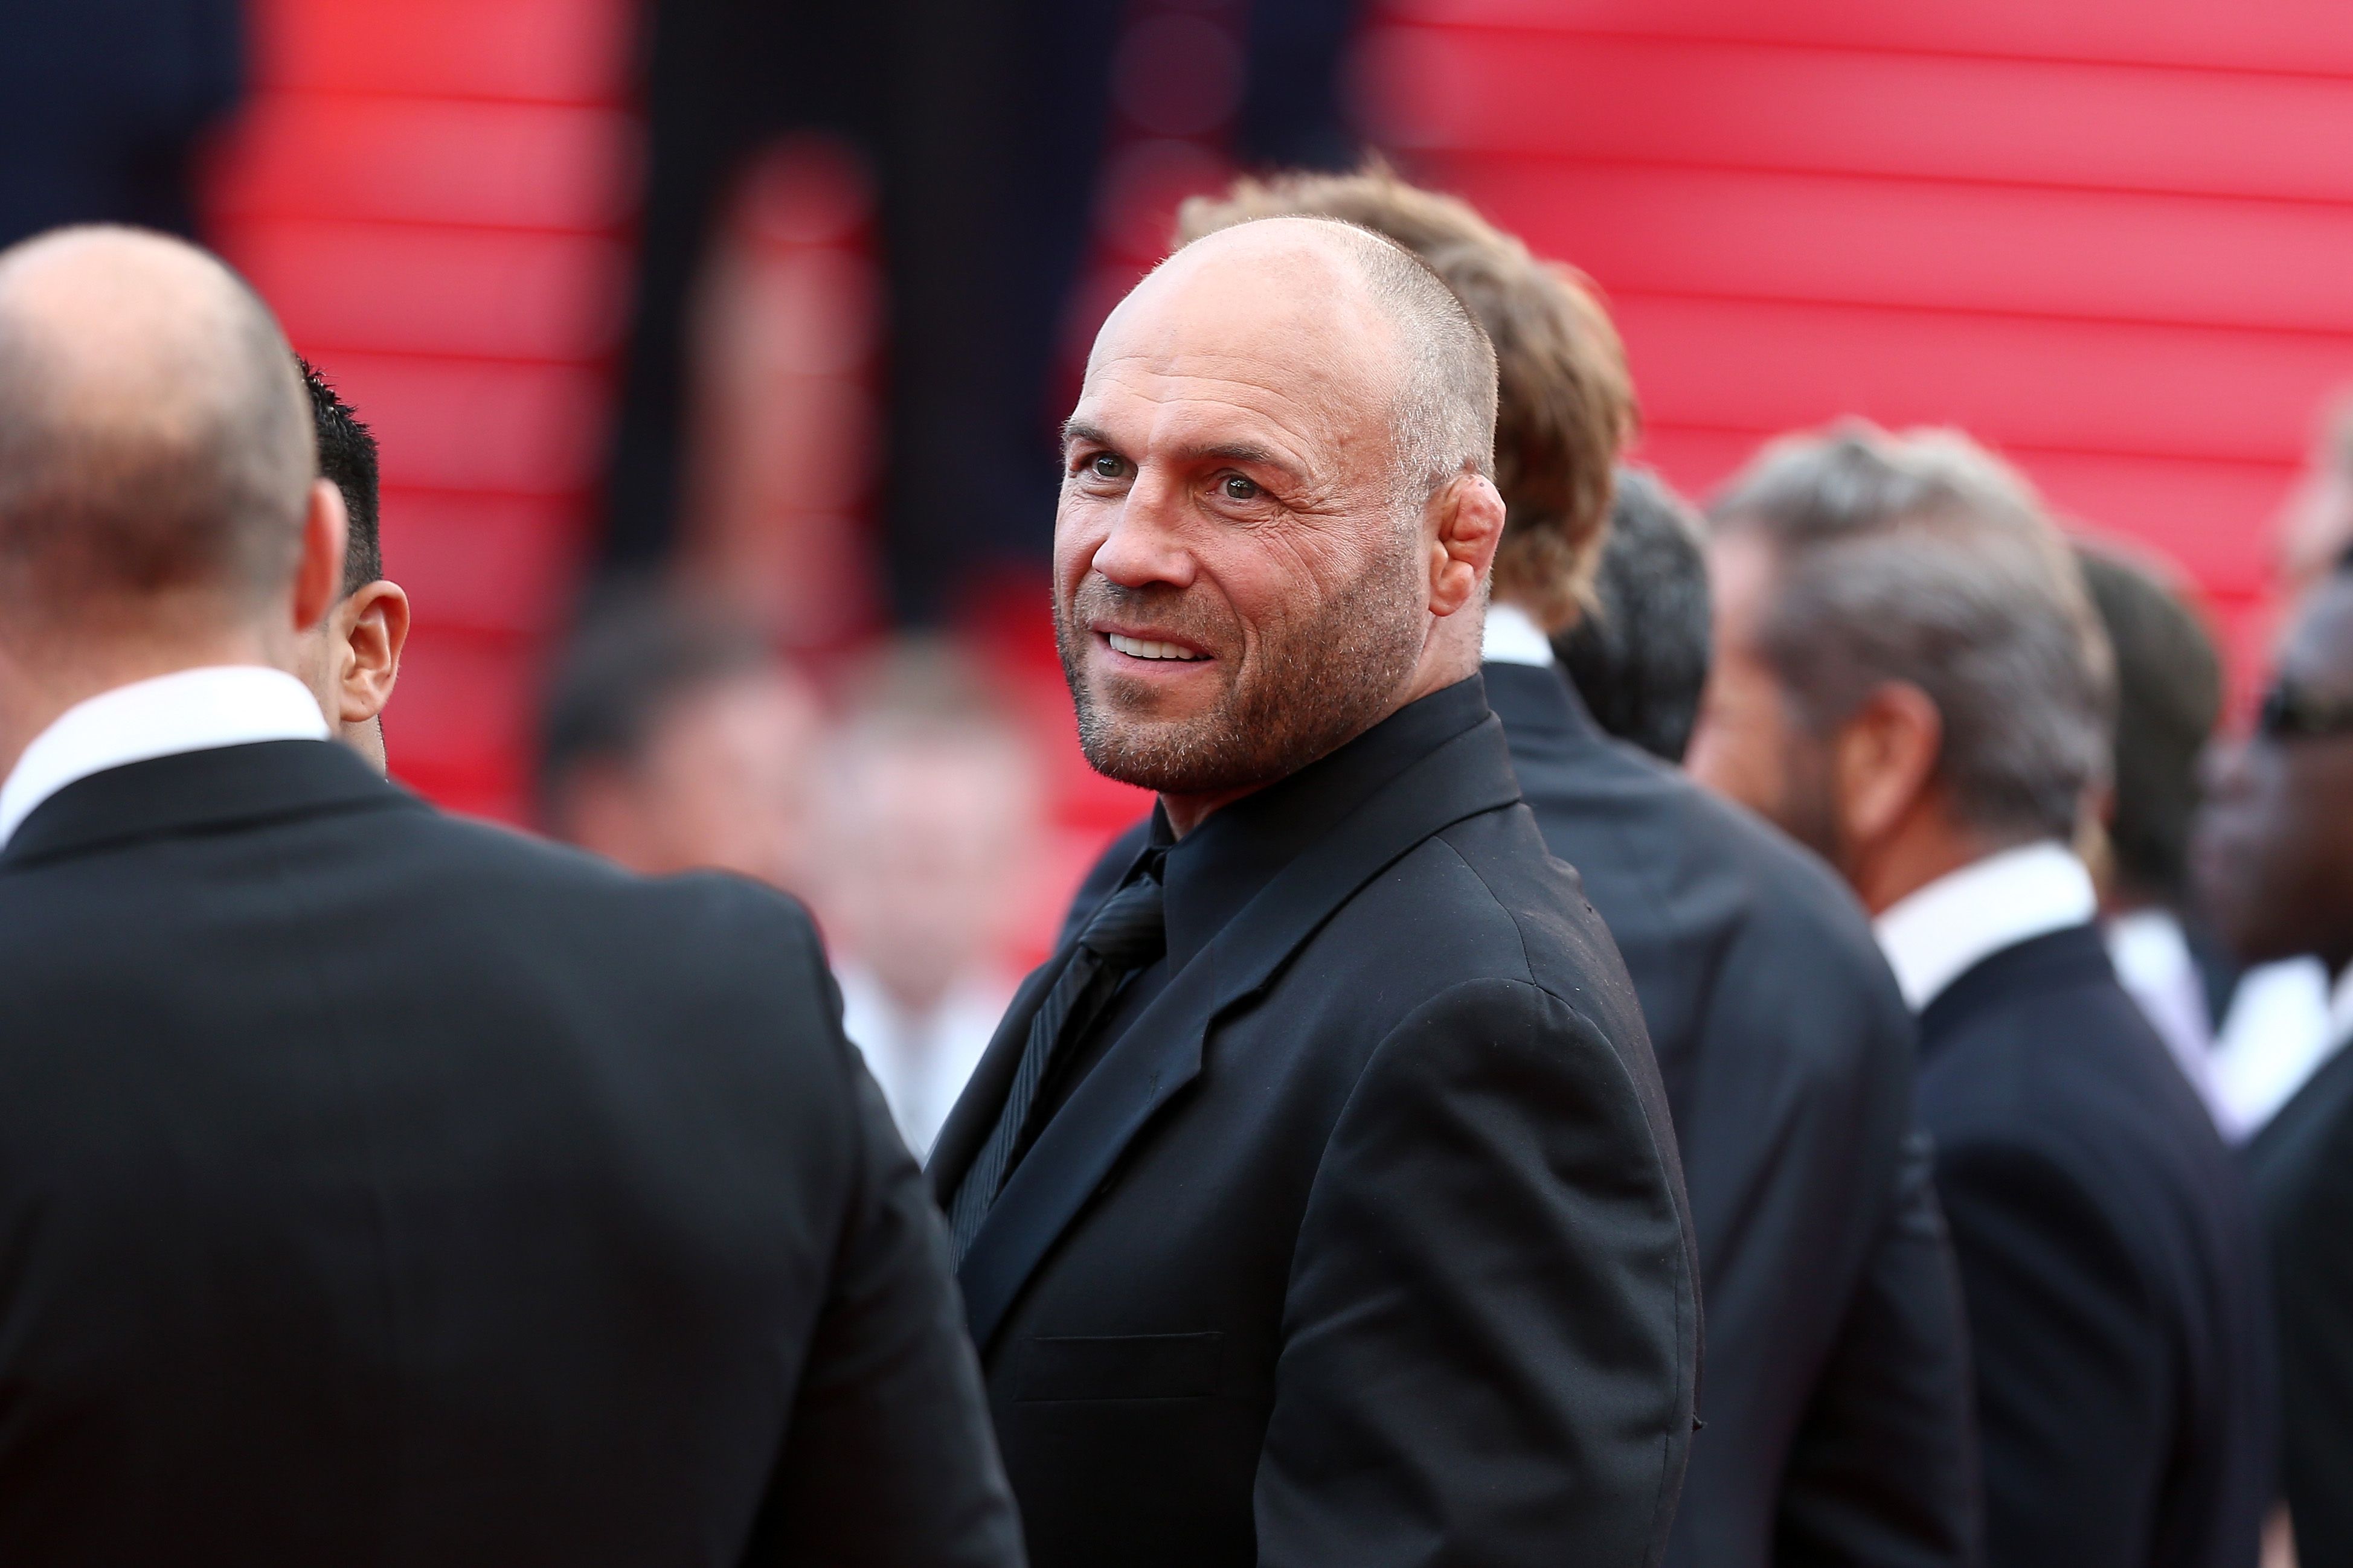 Randy Couture attends The Expendables 3 premiere